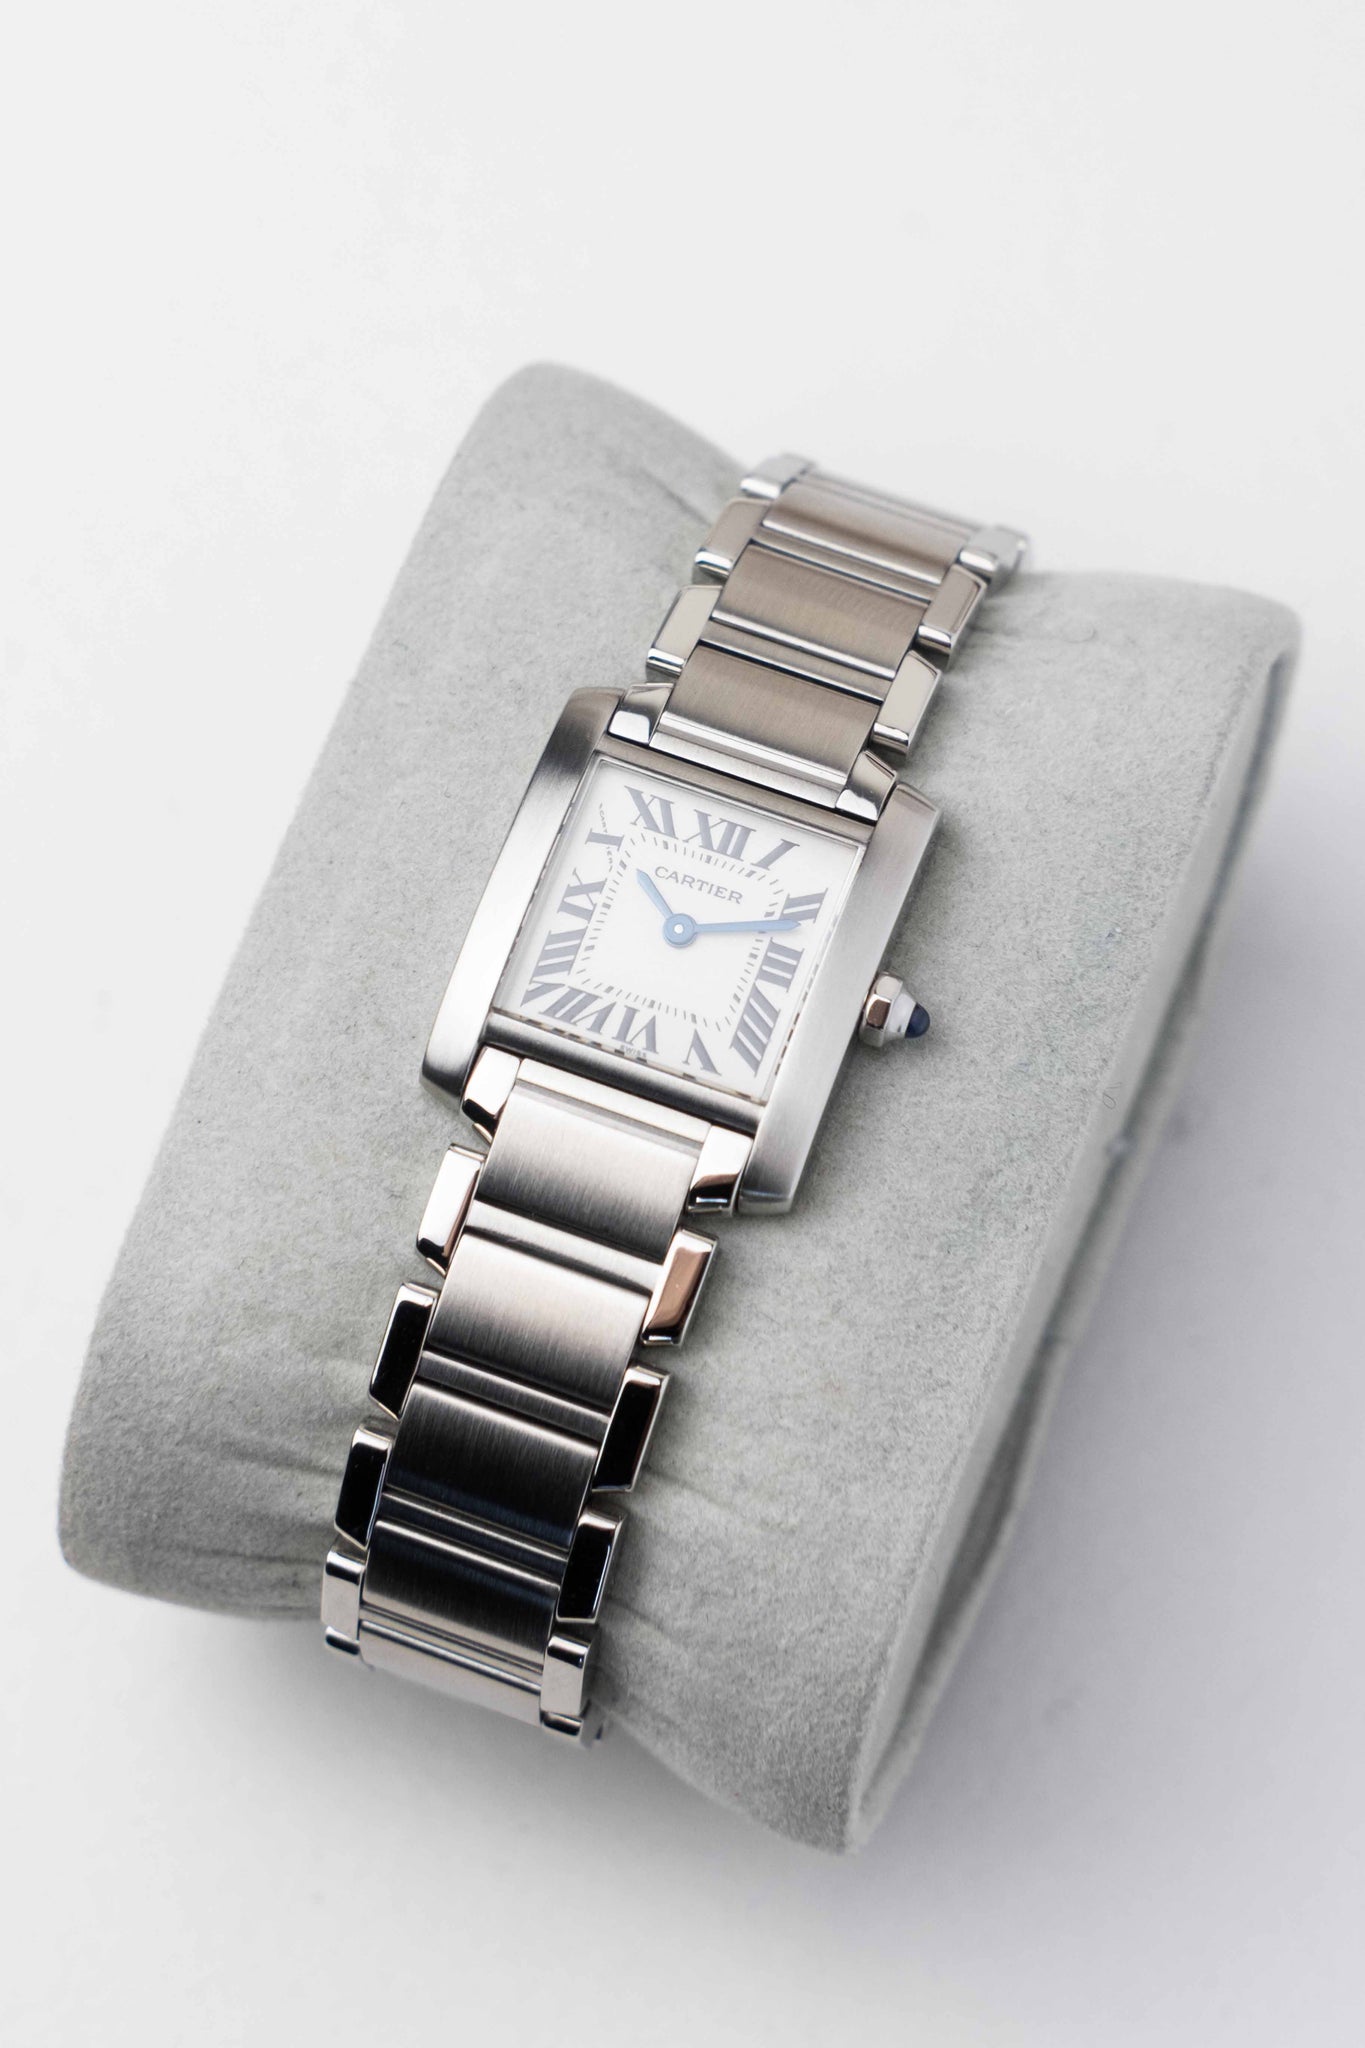 Cartier Tank Francaise Ref. 2300 1998 w/ Box & Papers